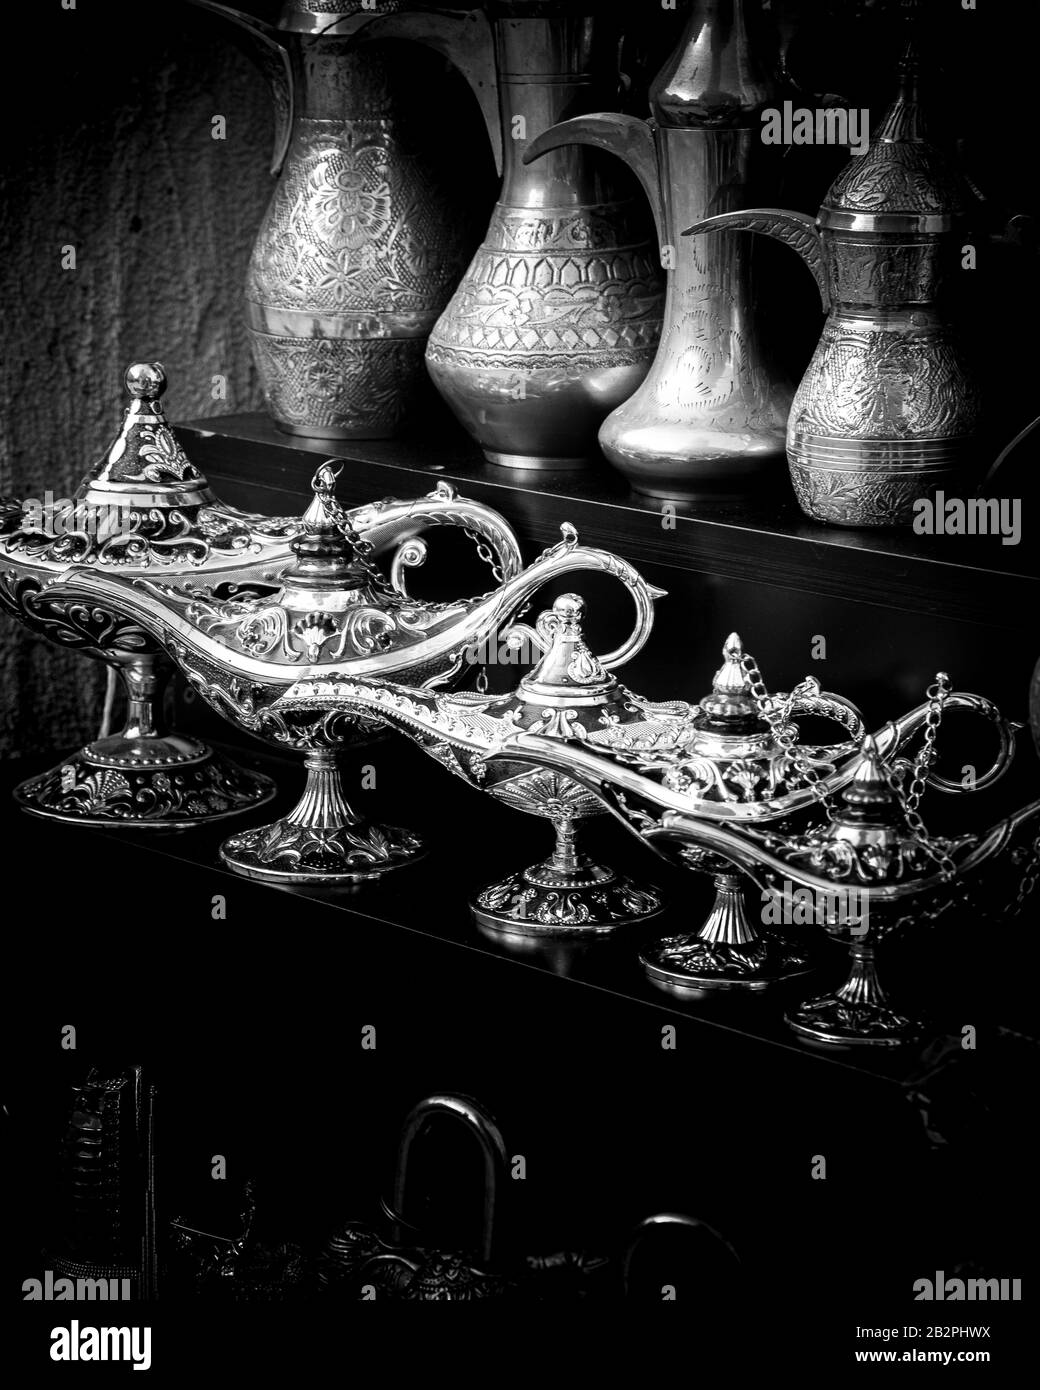 Black and white close up of magic lamps and traditional Arabian style coffee pots. Stock Photo